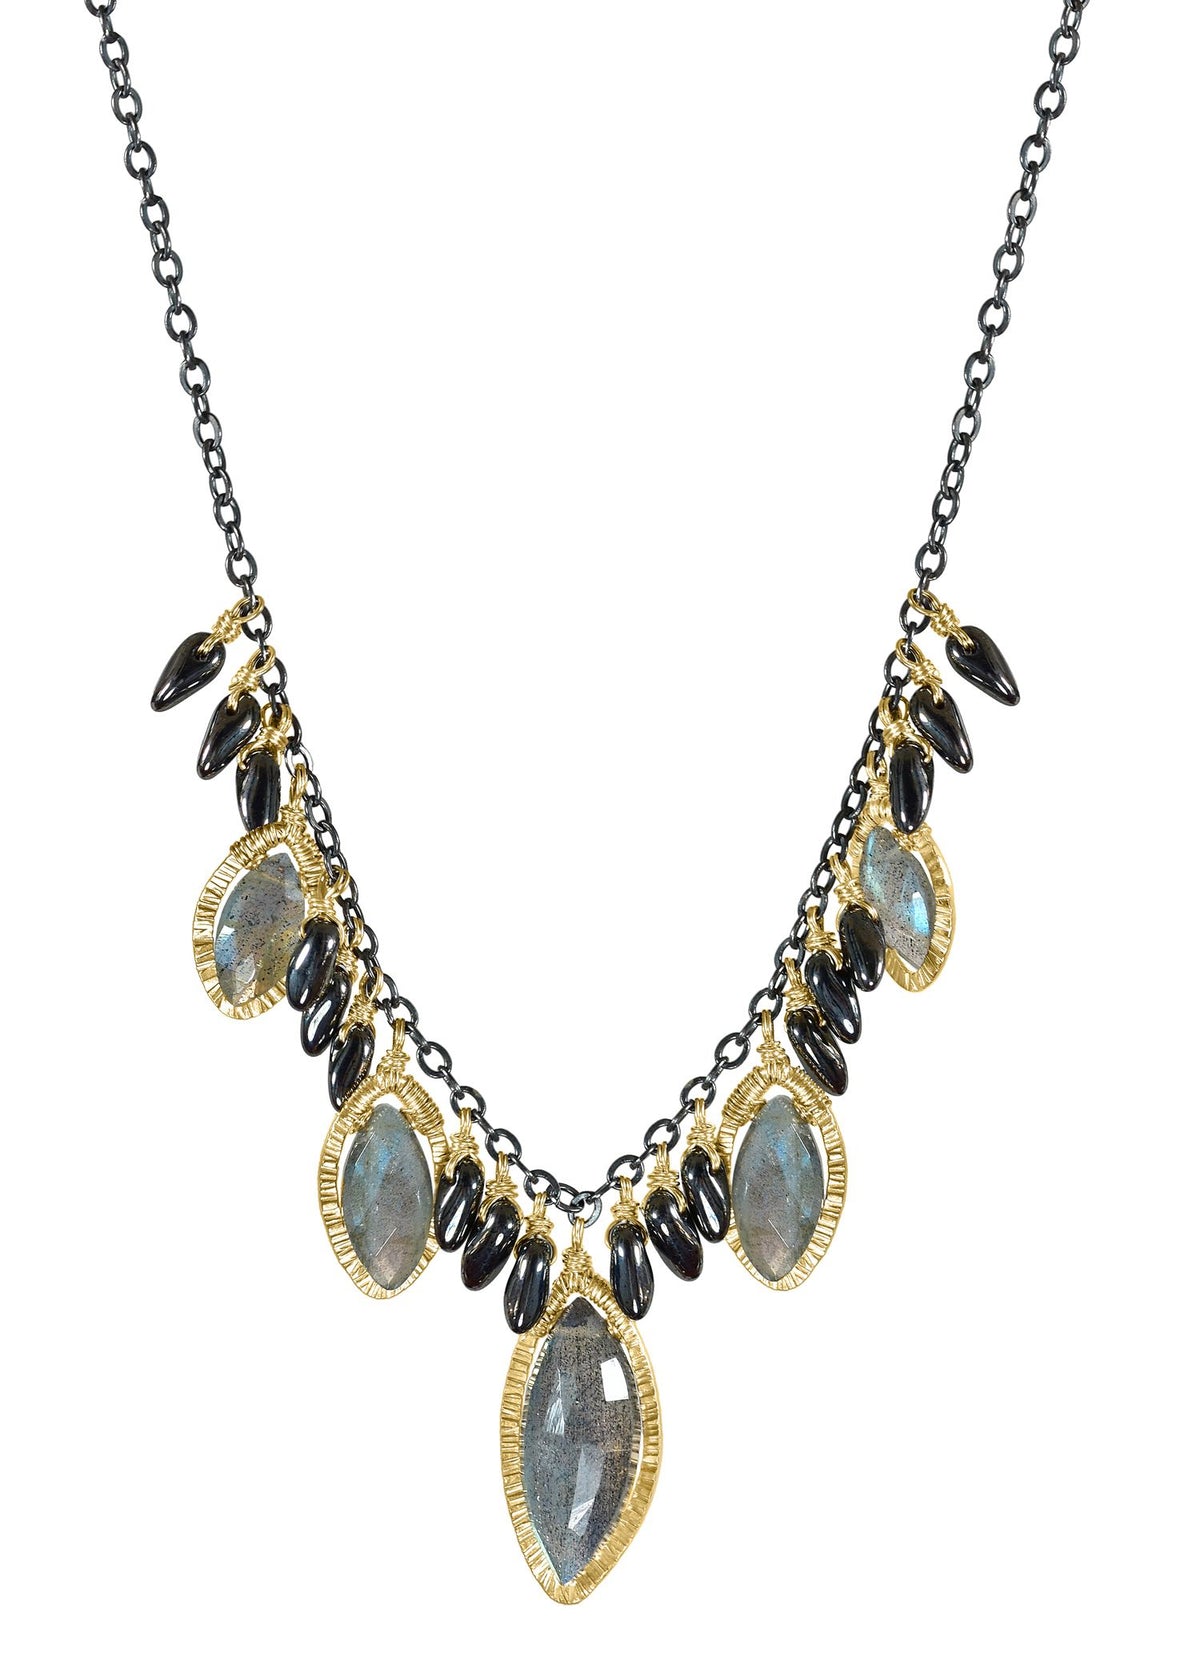 Labradorite Hematite glass beads 14k gold fill Blackened sterling silver Necklace measures 18-1/4&quot; in length Pendant measures 13/16&quot; in length and 3/8&quot; in width Handmade in our Los Angeles studio